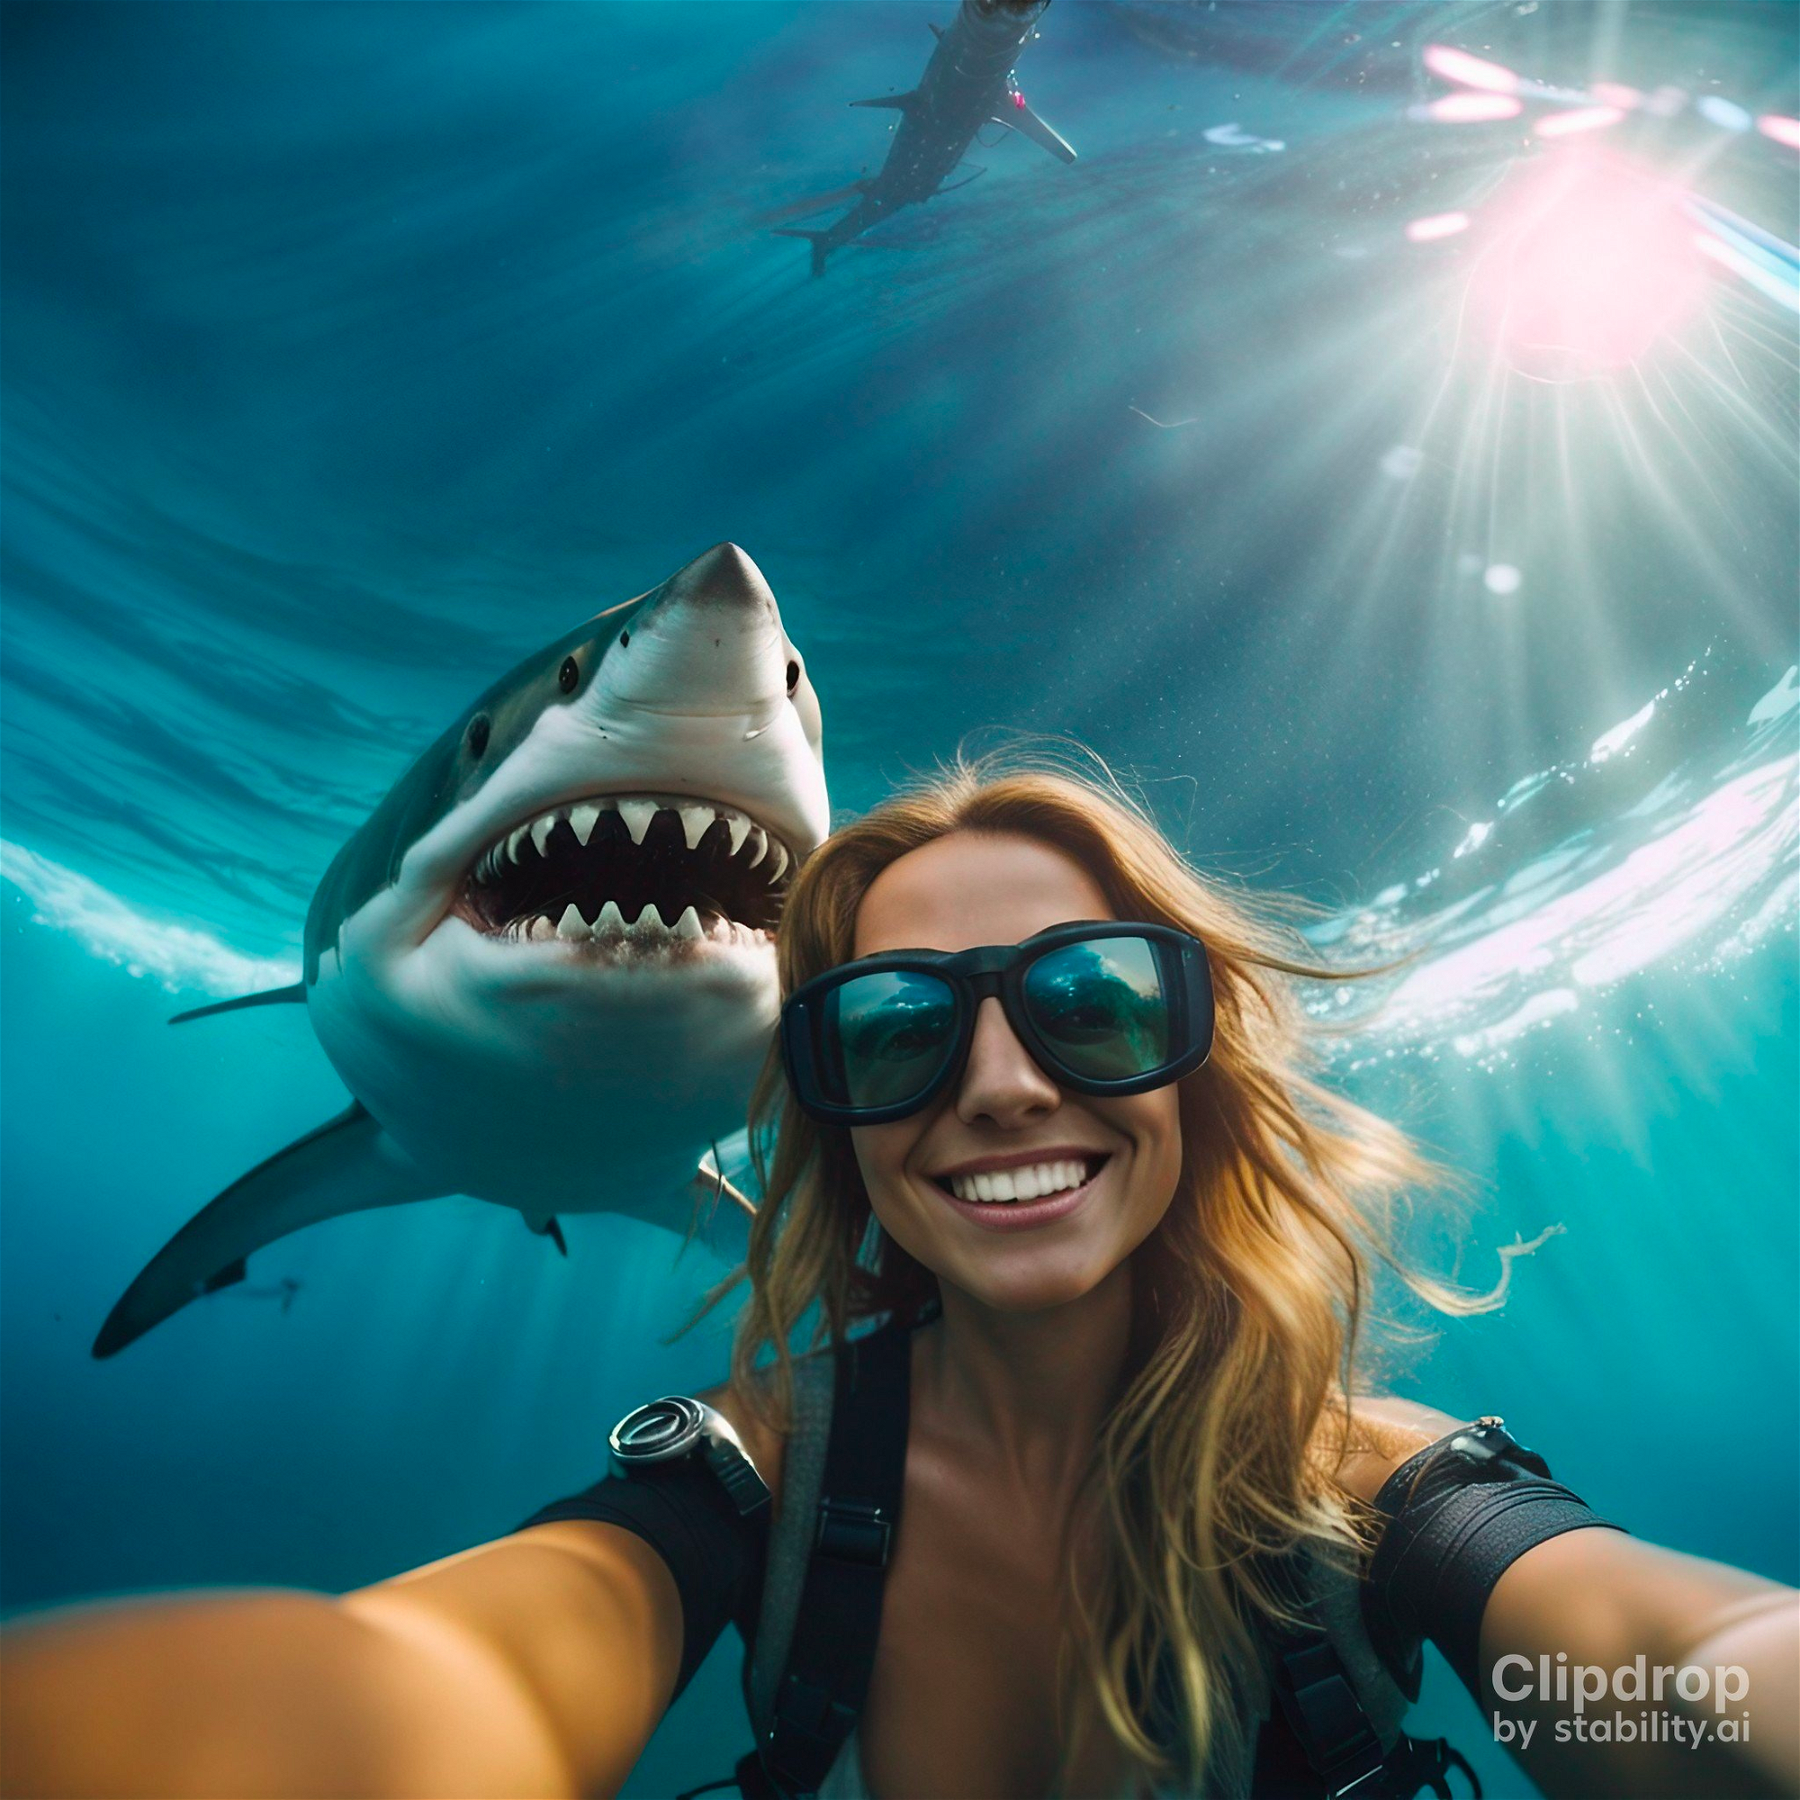 A hyper - realistic GoPro selfie of a smiling glamorous Influencer with shark. Extreme environment.
Style: Photographic